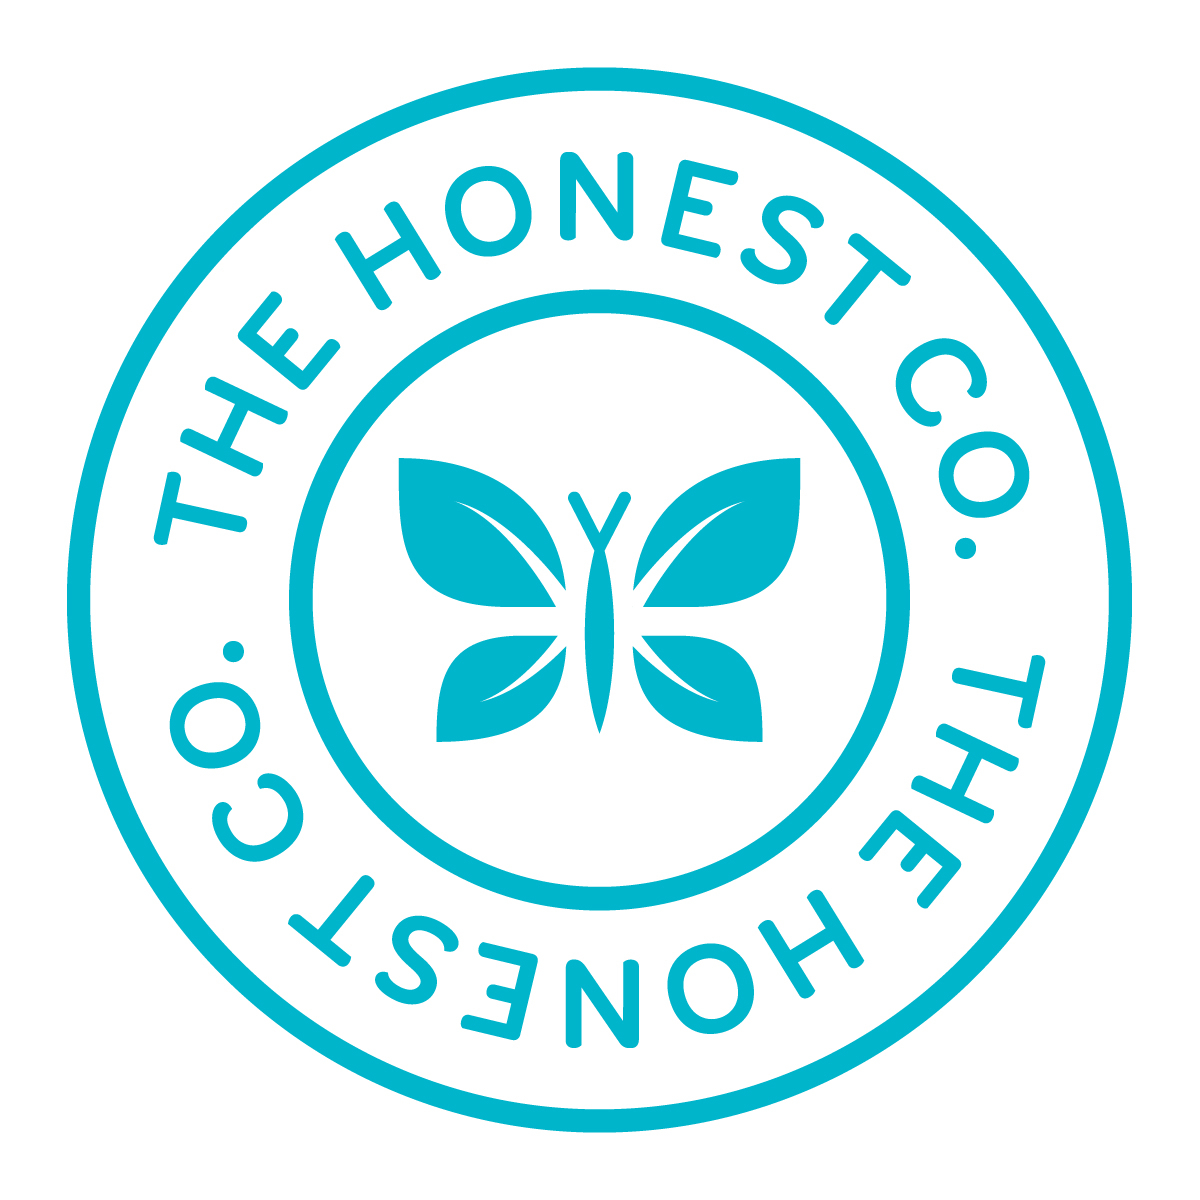 The Honest Company, previously sold exclusively online, is now launching their products at The Baby Grocery Store in Charlotte, NC.